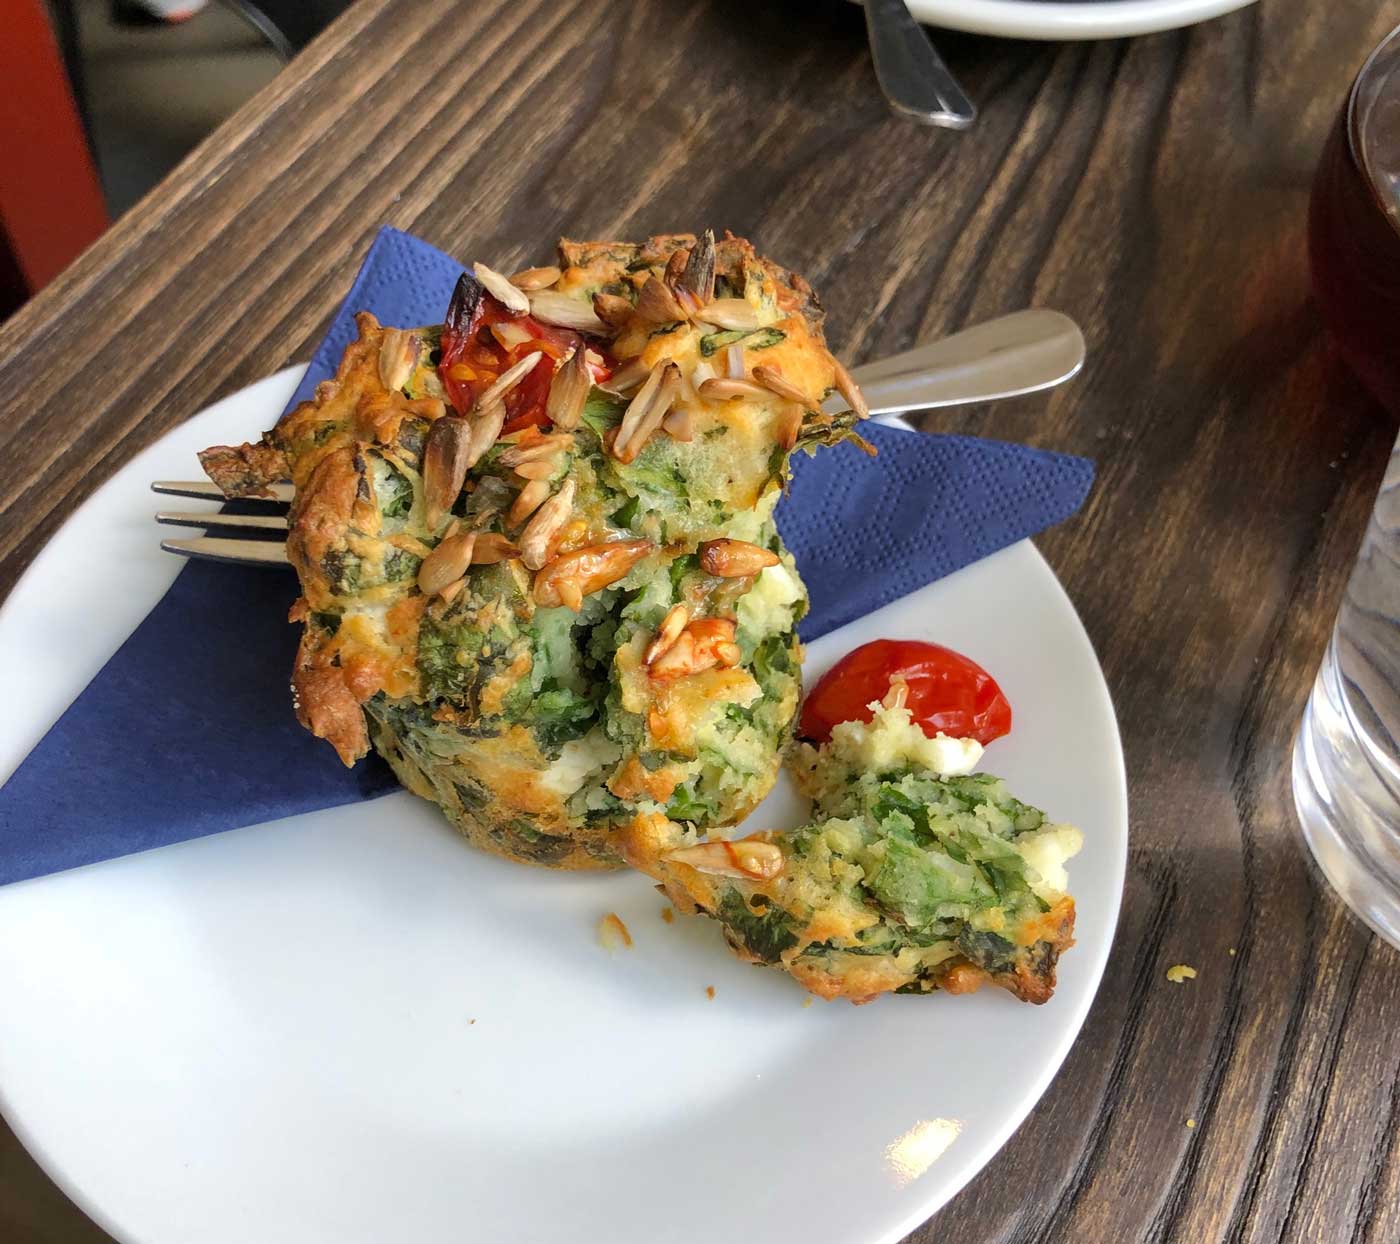 A very delicious looking muffin with spinach inside the dough and a visible tomato